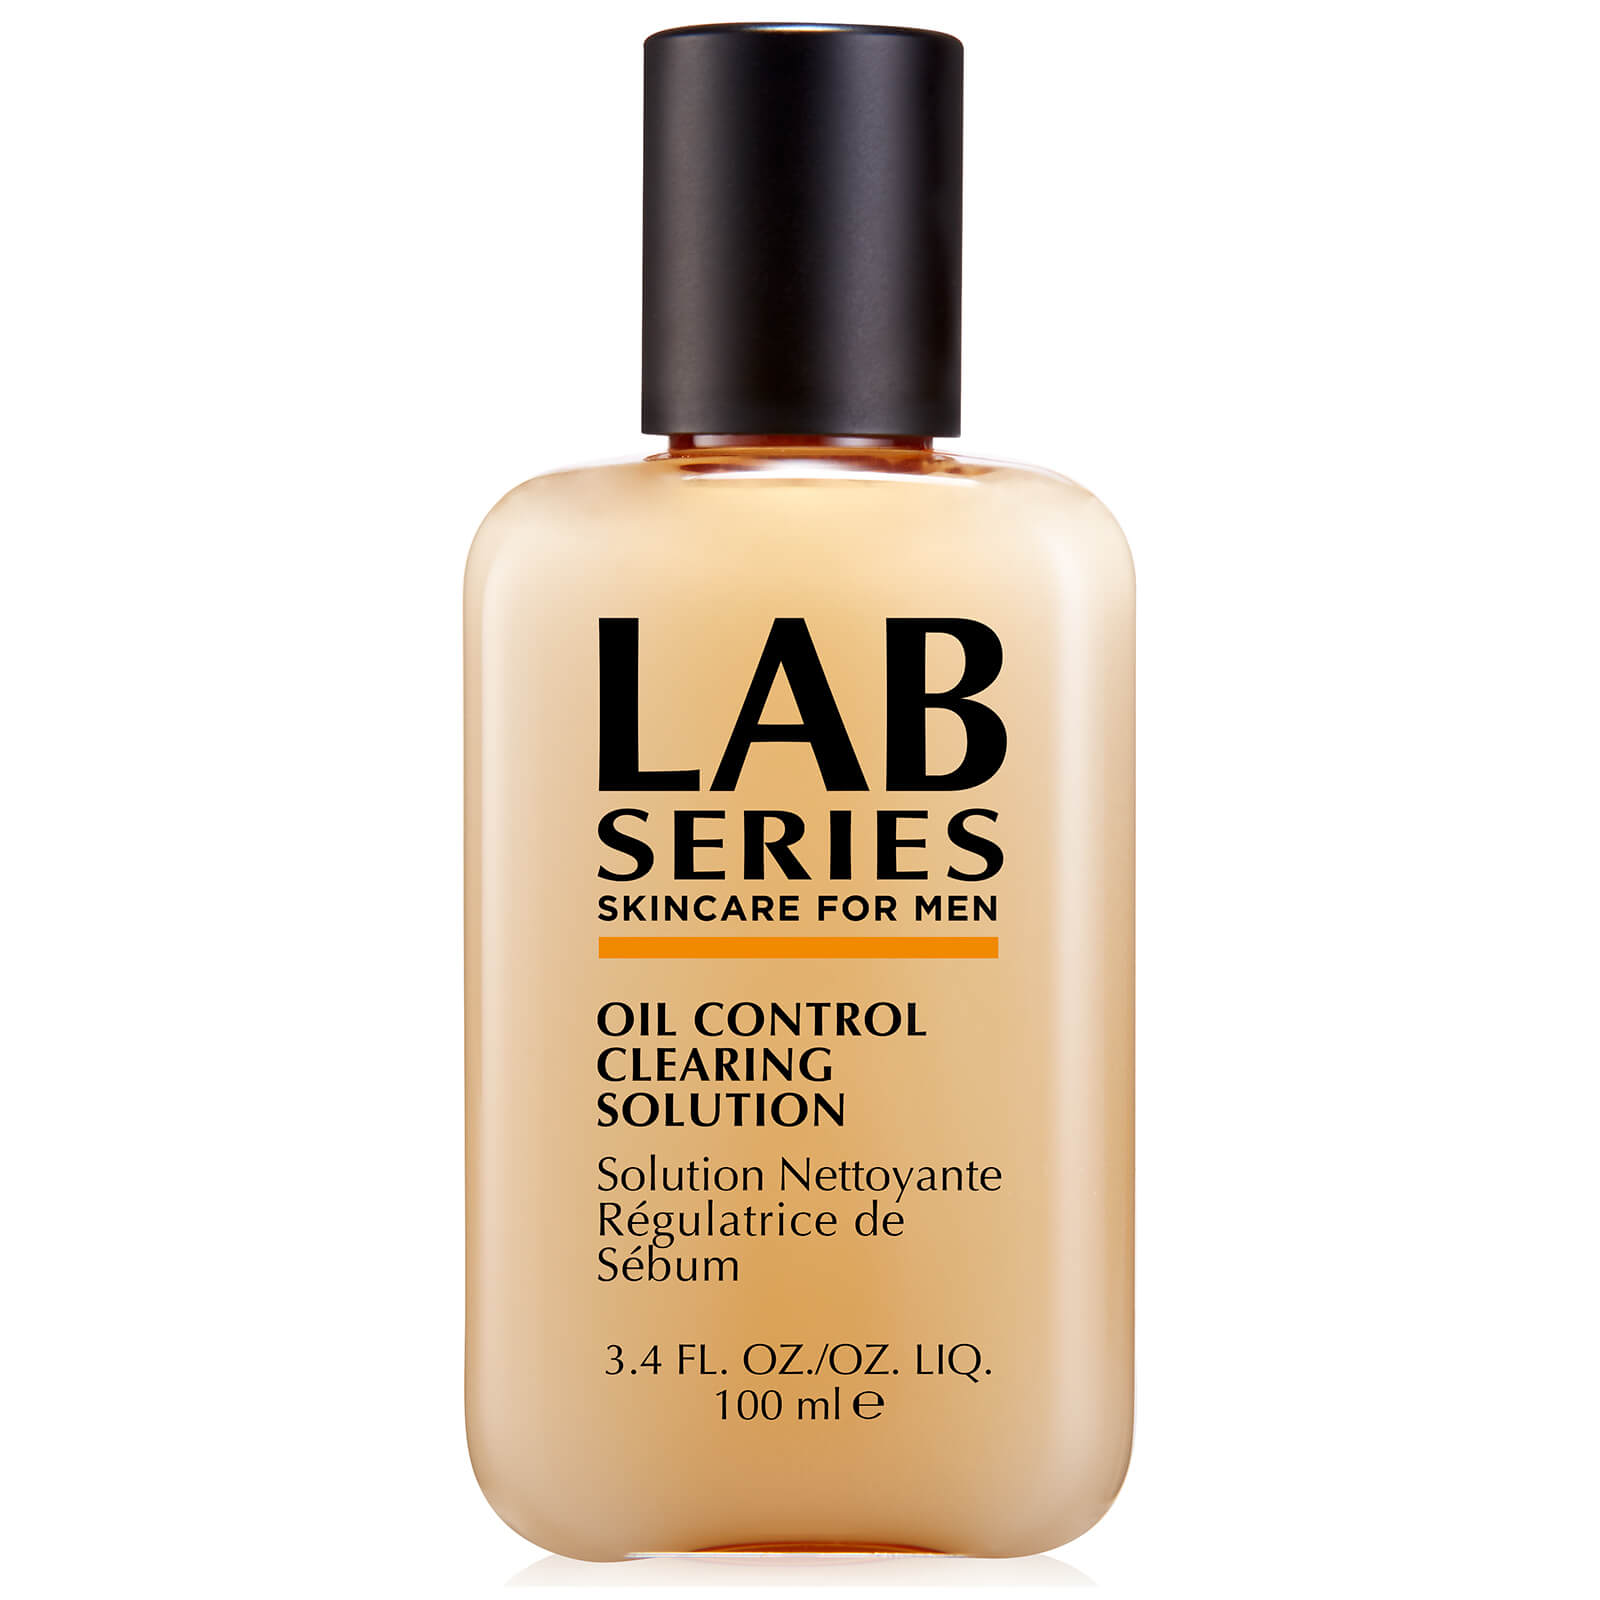  Lab Series Oil Control Clearing Solution